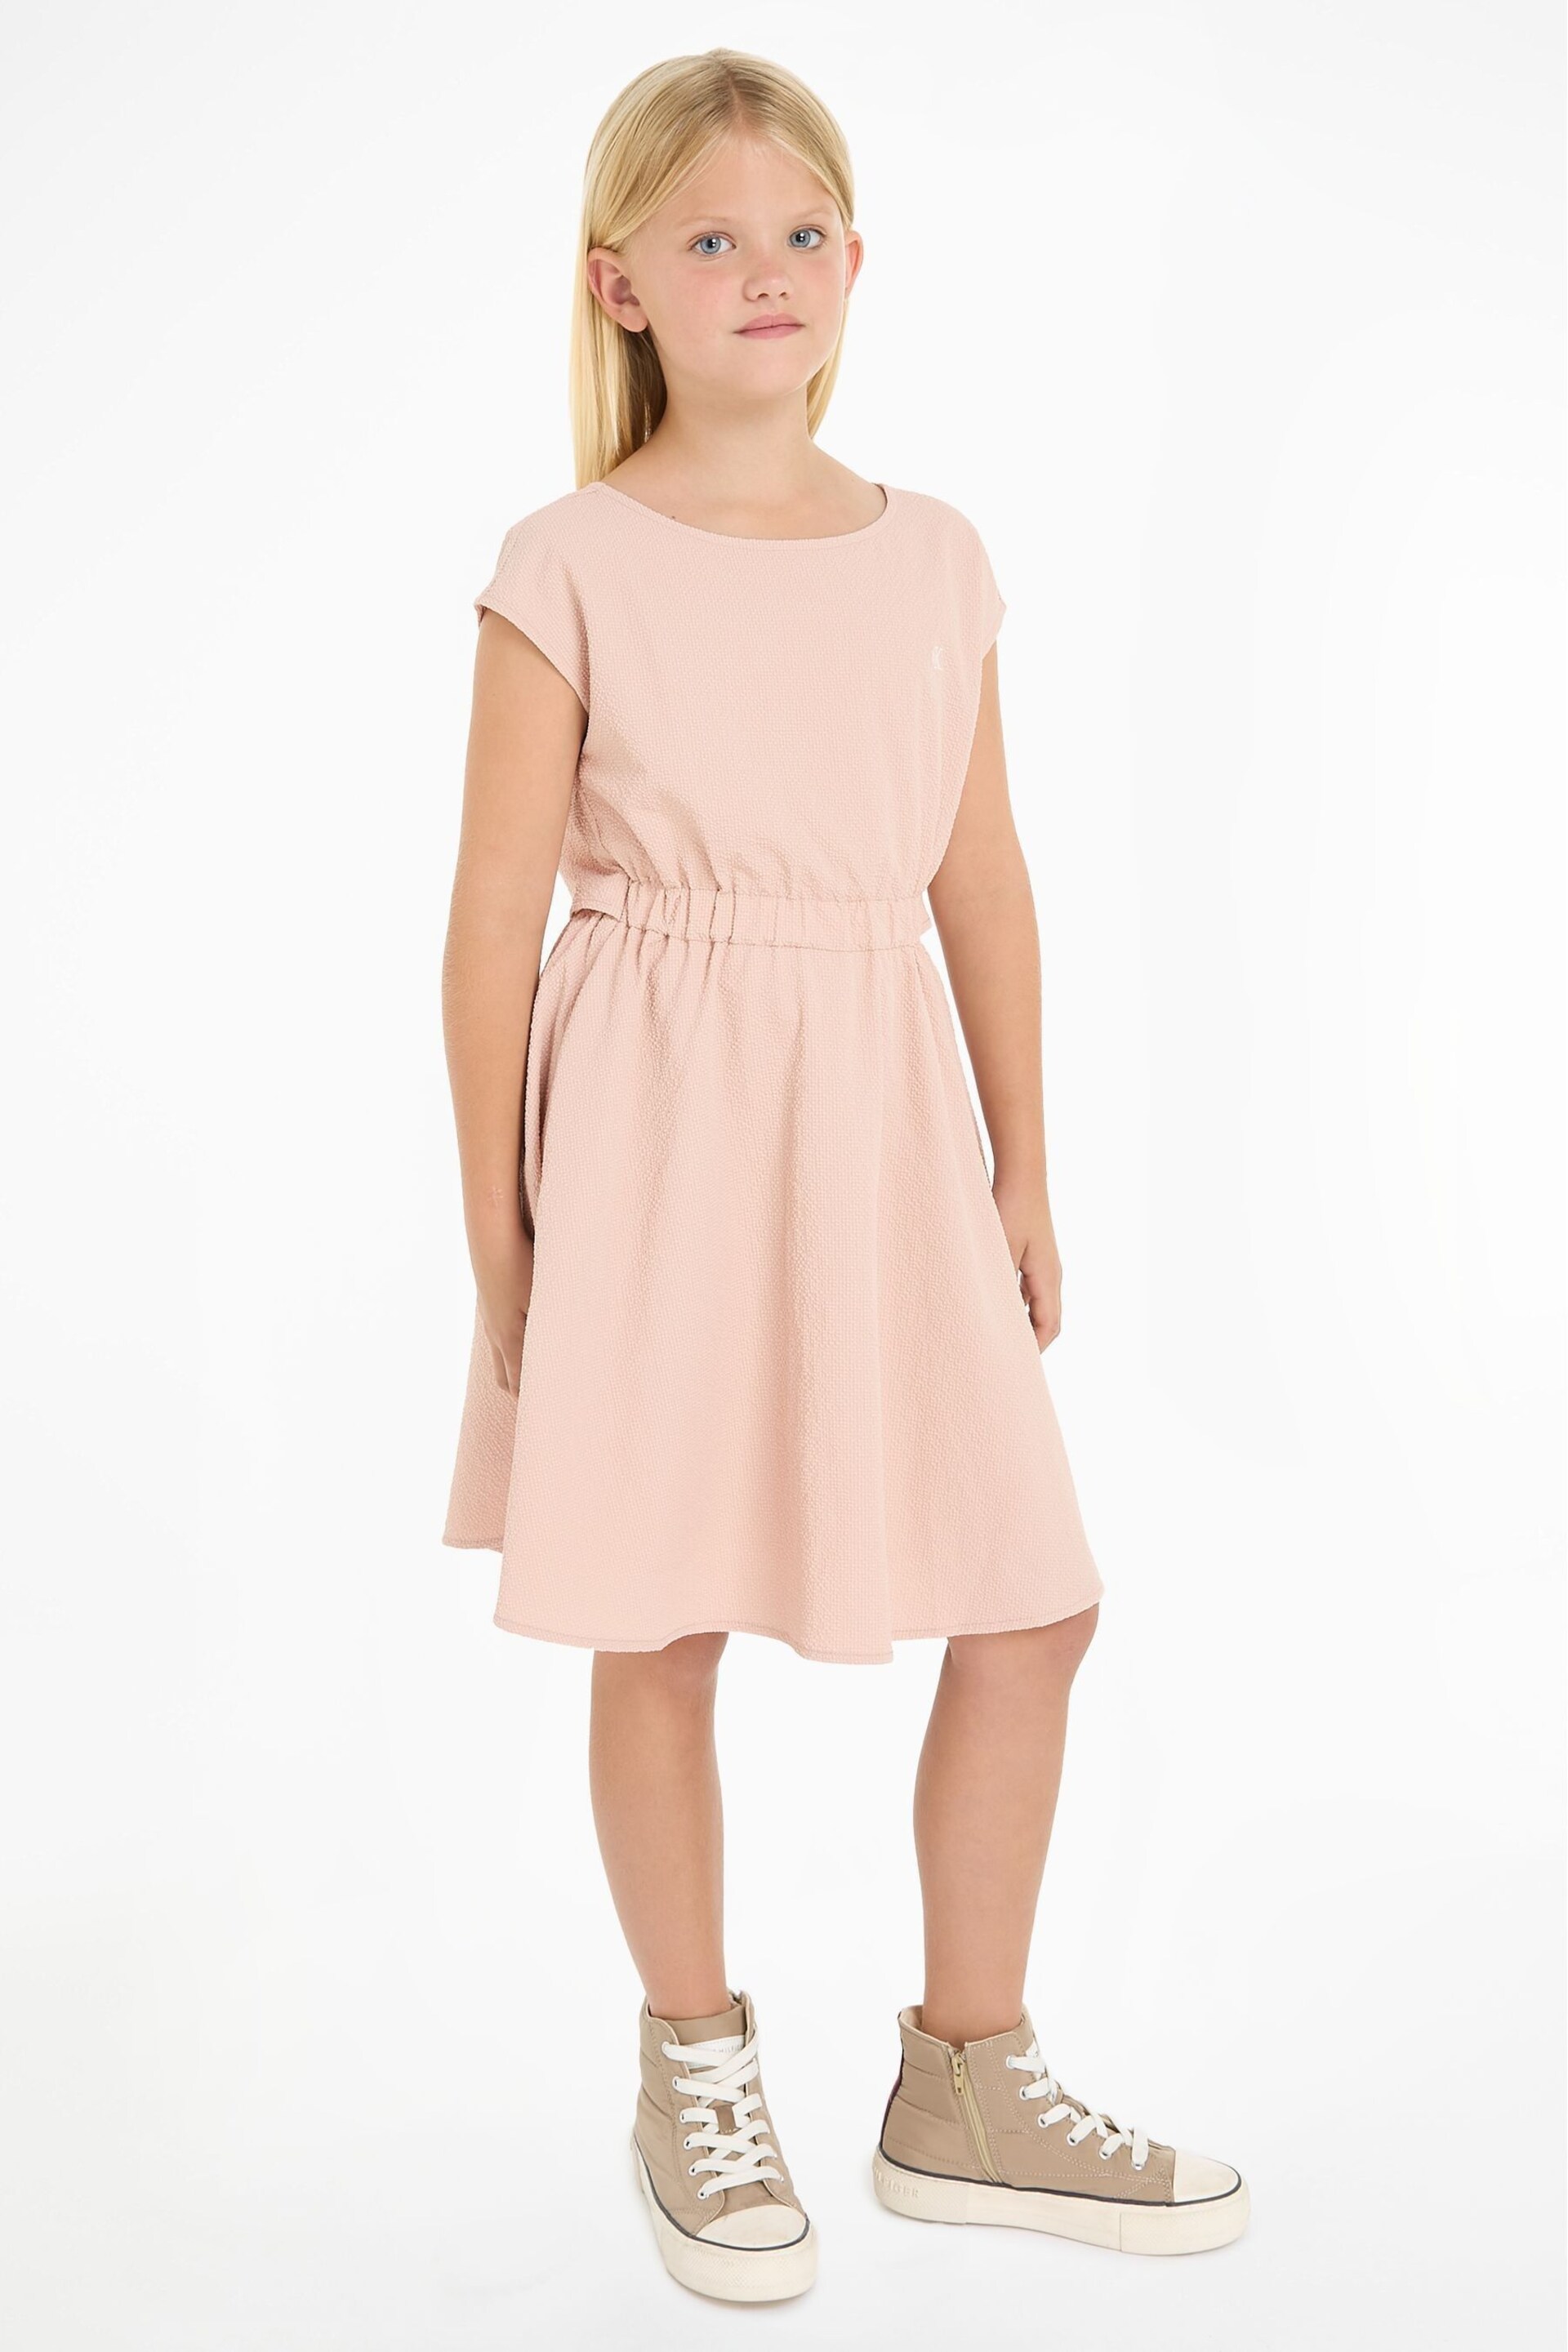 Calvin Klein Pink Fit And Flare Seersucke Dress - Image 1 of 6